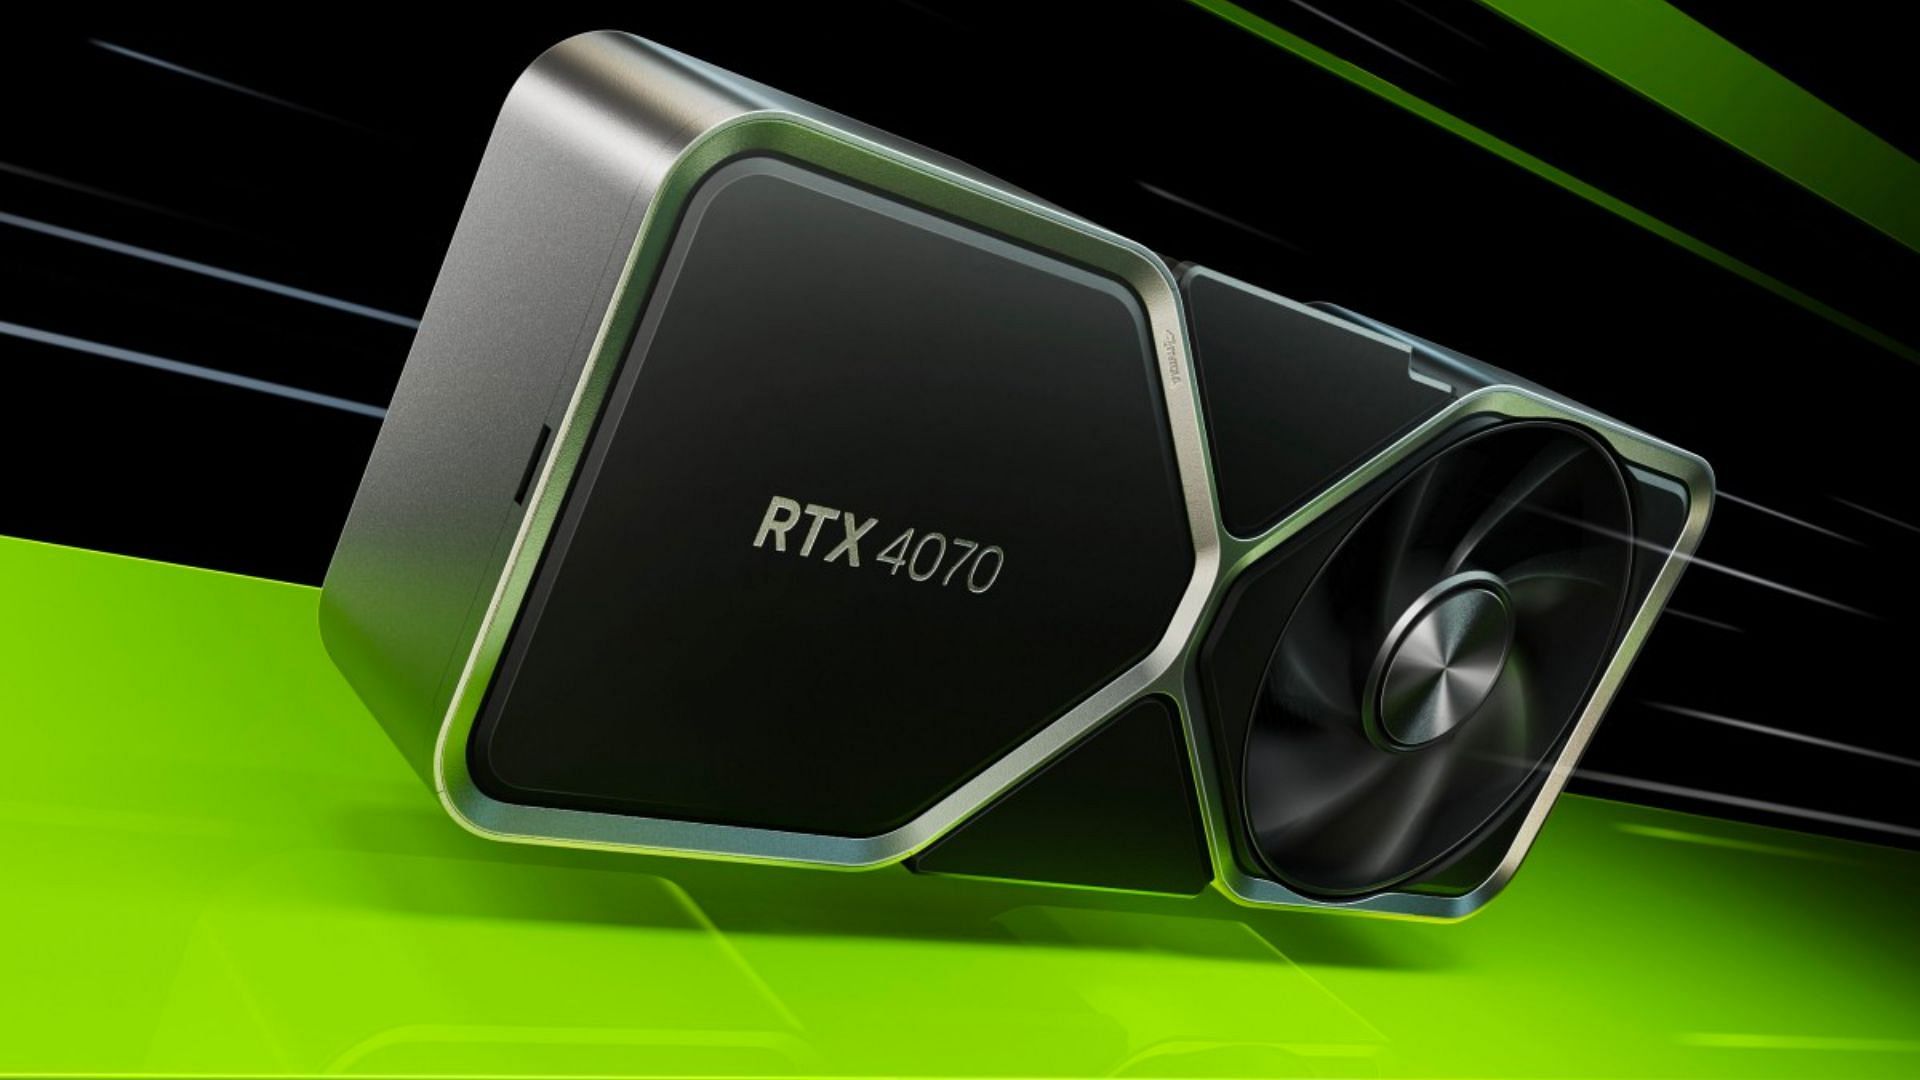 Buy the Nvidia RTX 4070 or wait for RTX 5060? The decision can be tough (Image via Nvidia)